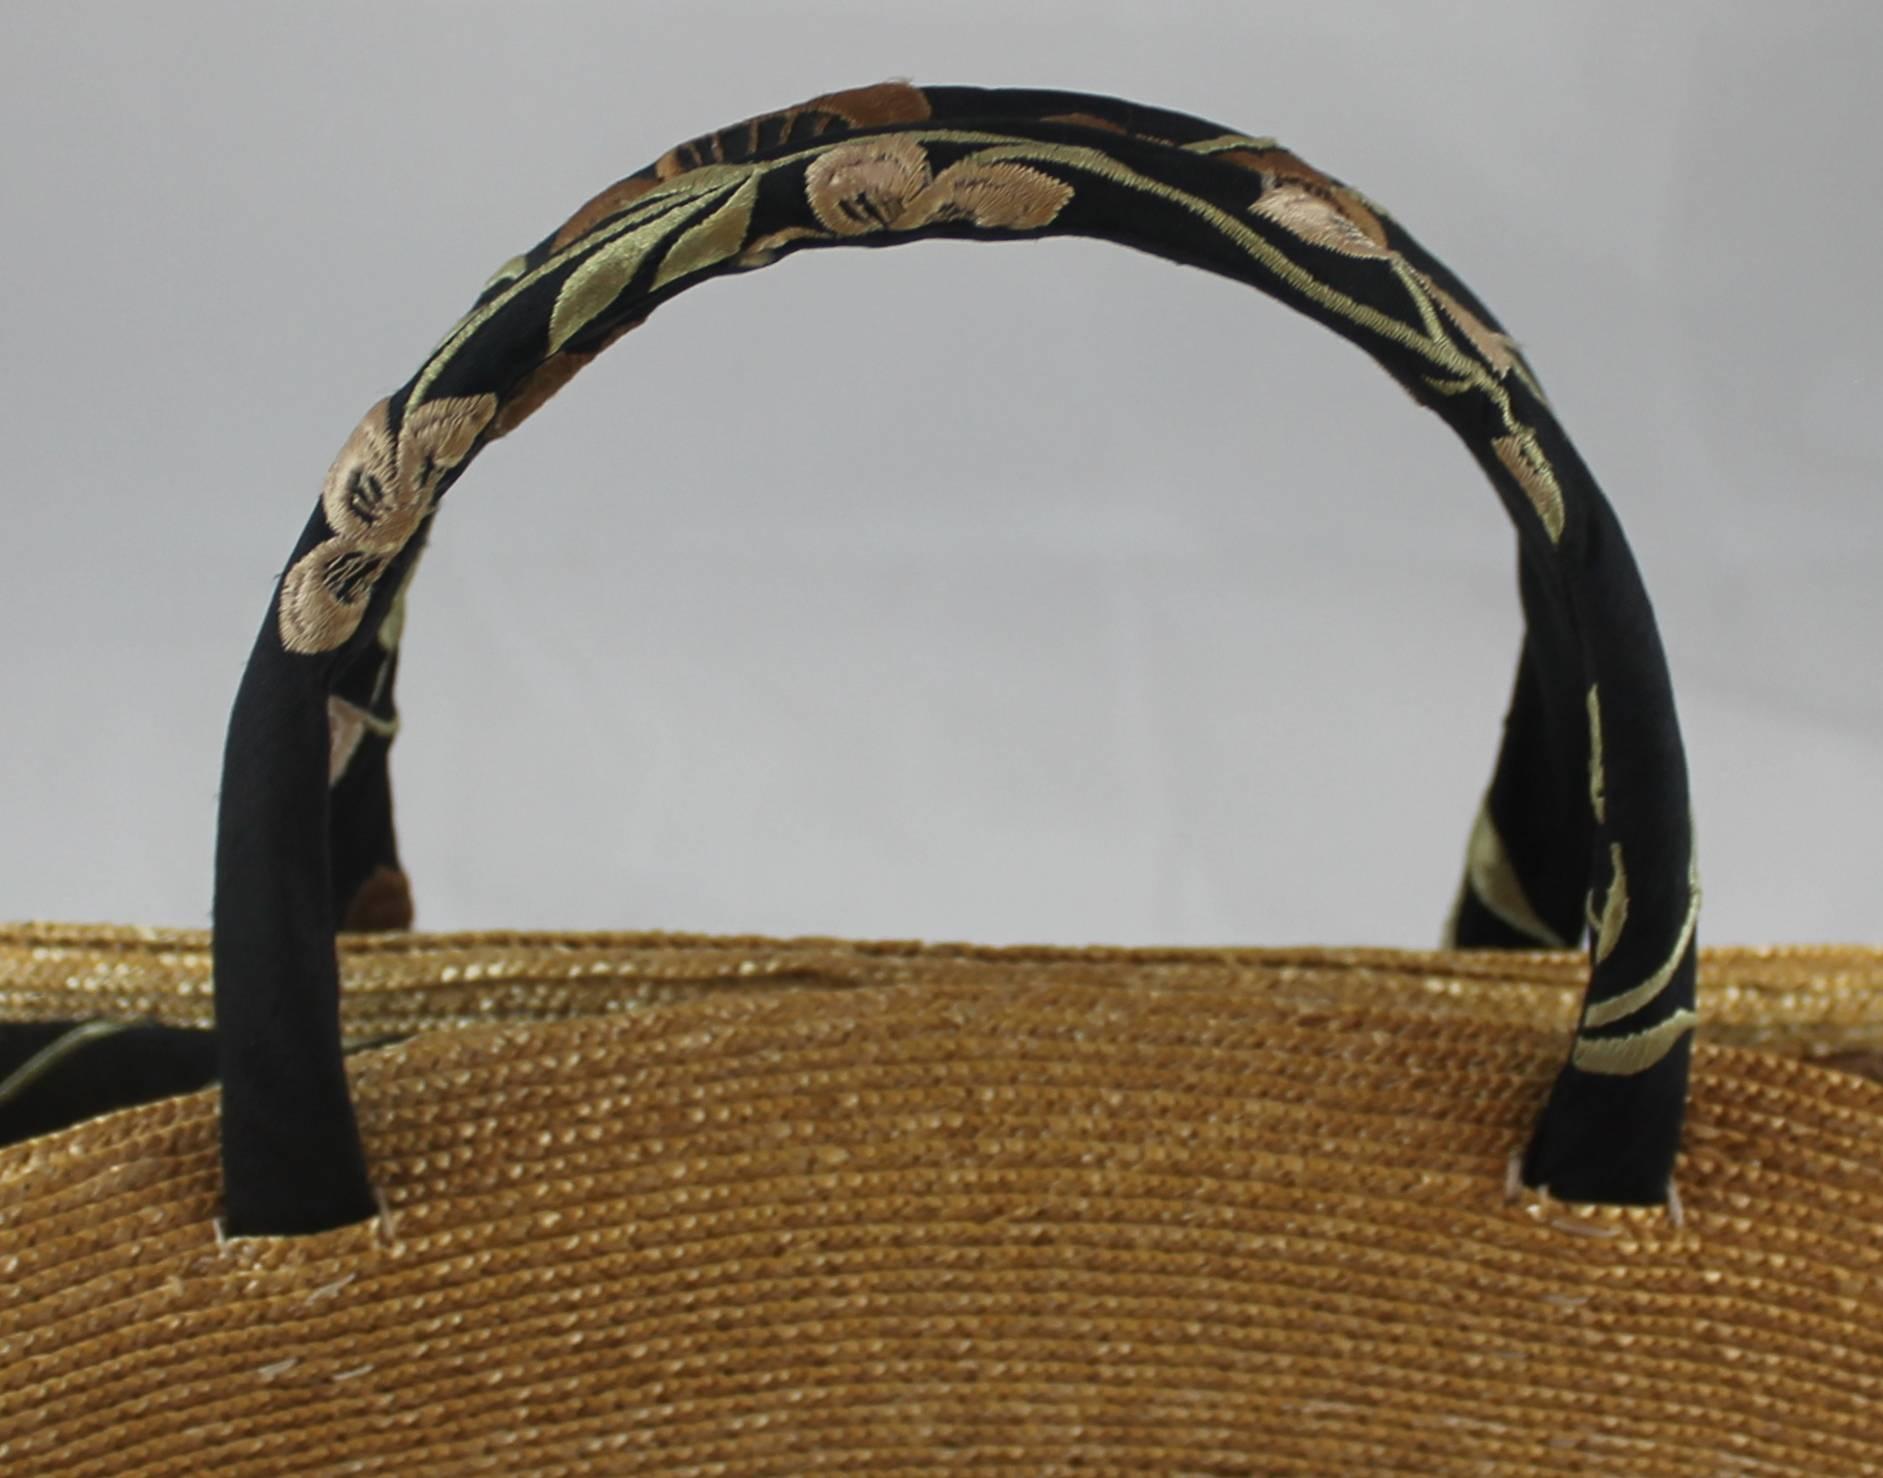 Women's Suzanne Couture Millinery Small Tan Woven Straw Bag with Floral Handles